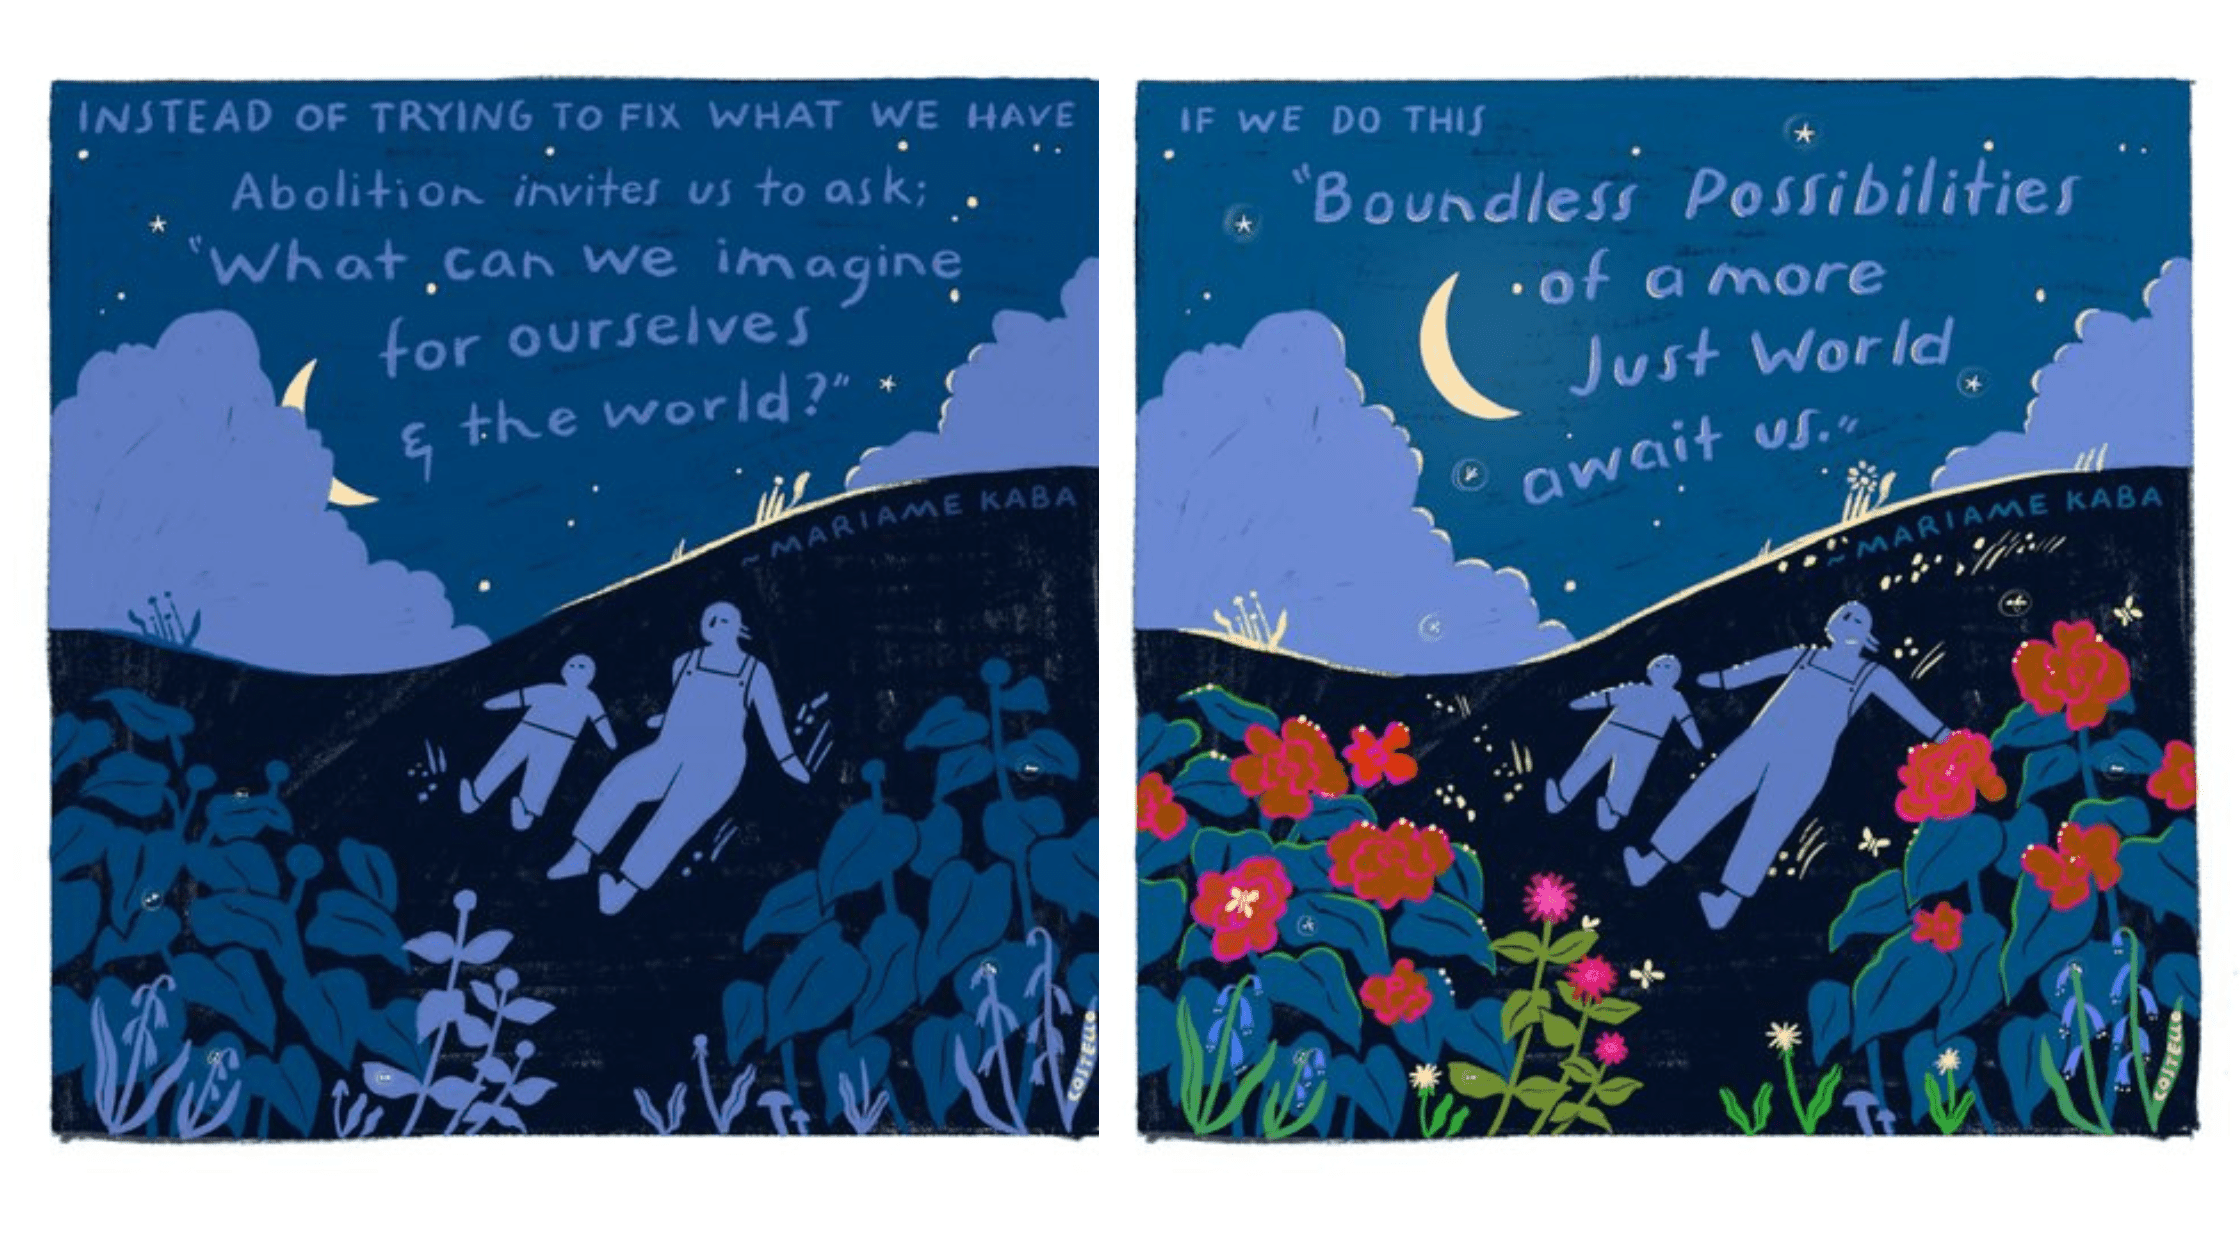 Artwork, featuring an adult and a youth lying on a hillside in the moonlight, by Molly Costello with quotes by Miriame Kaba: Instead of trying to fix what we have, Abolition invites us to ask, "What can we imagine for ourselves and the world?" If we do this, "Boundless possibilities of a more just world await us."